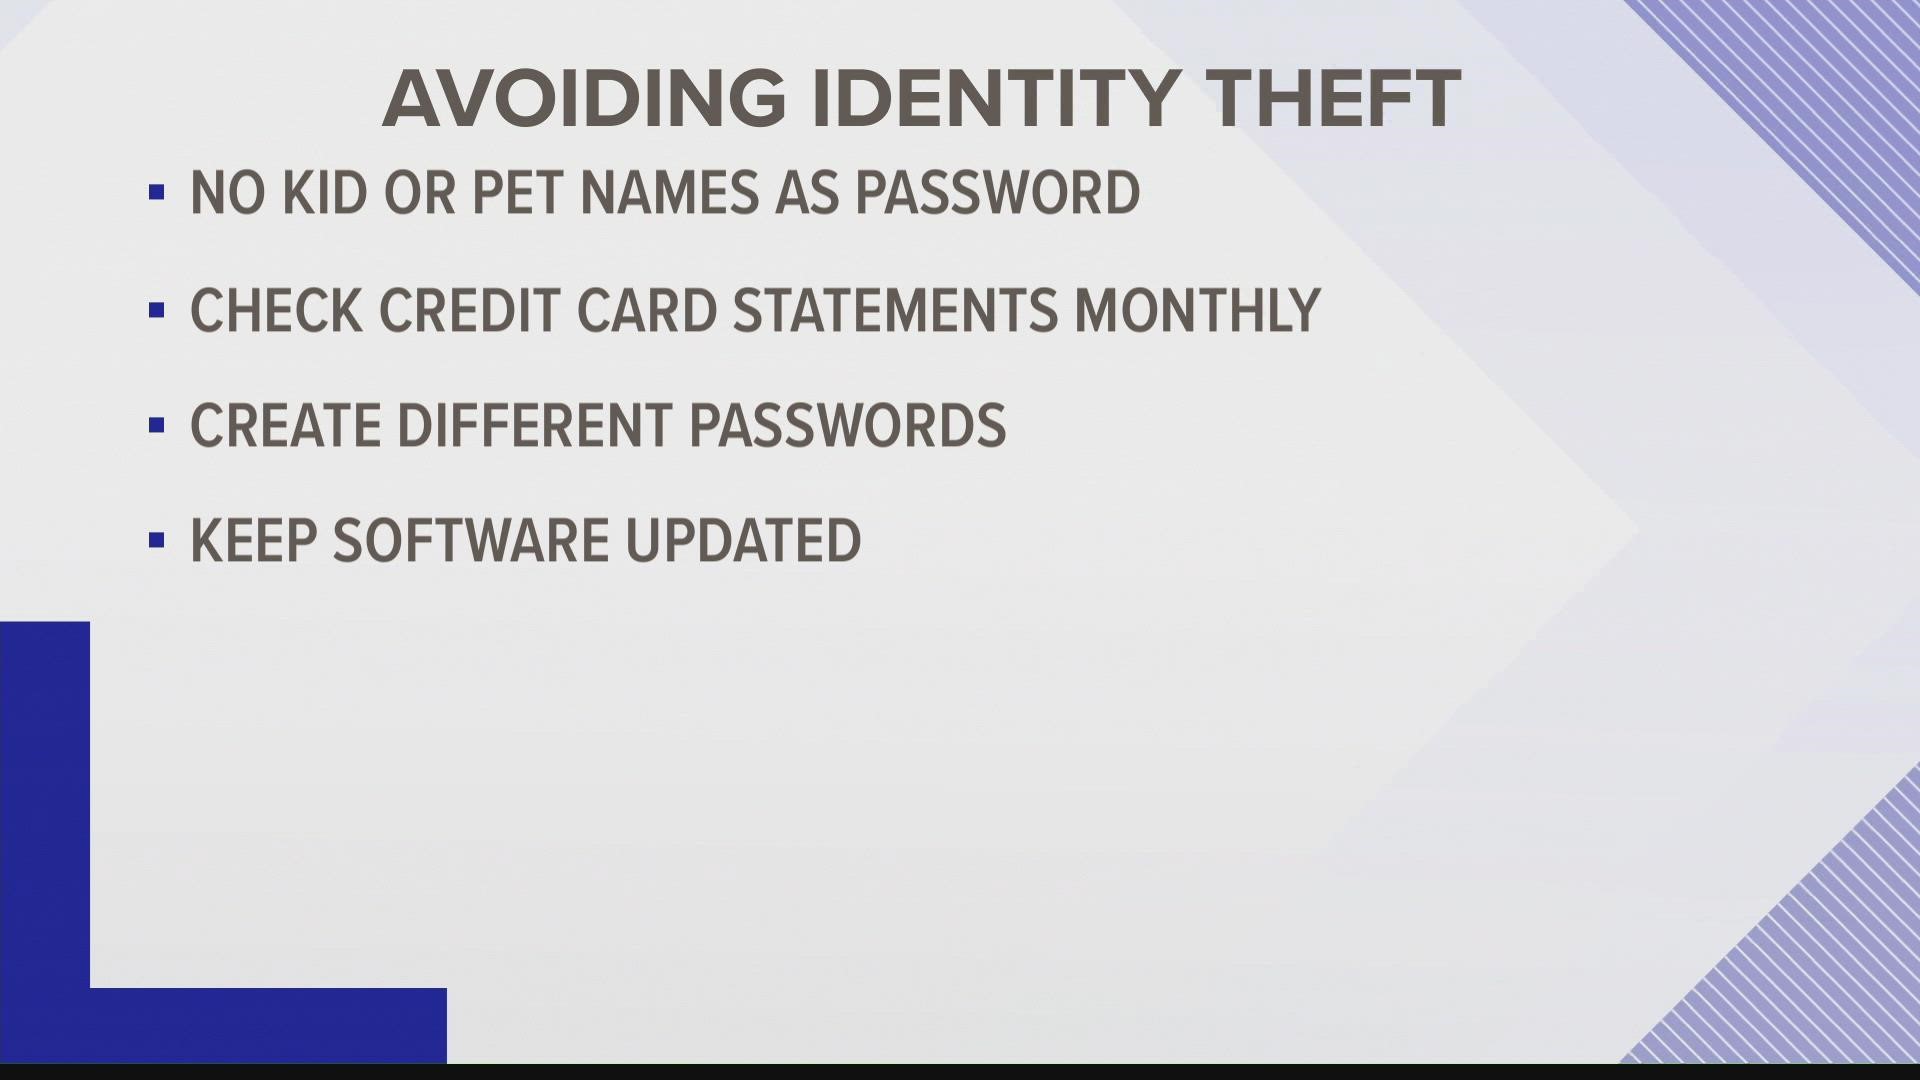 This Identity Theft Prevention and Awareness month, experts want you to know how you can stay cyber safe.